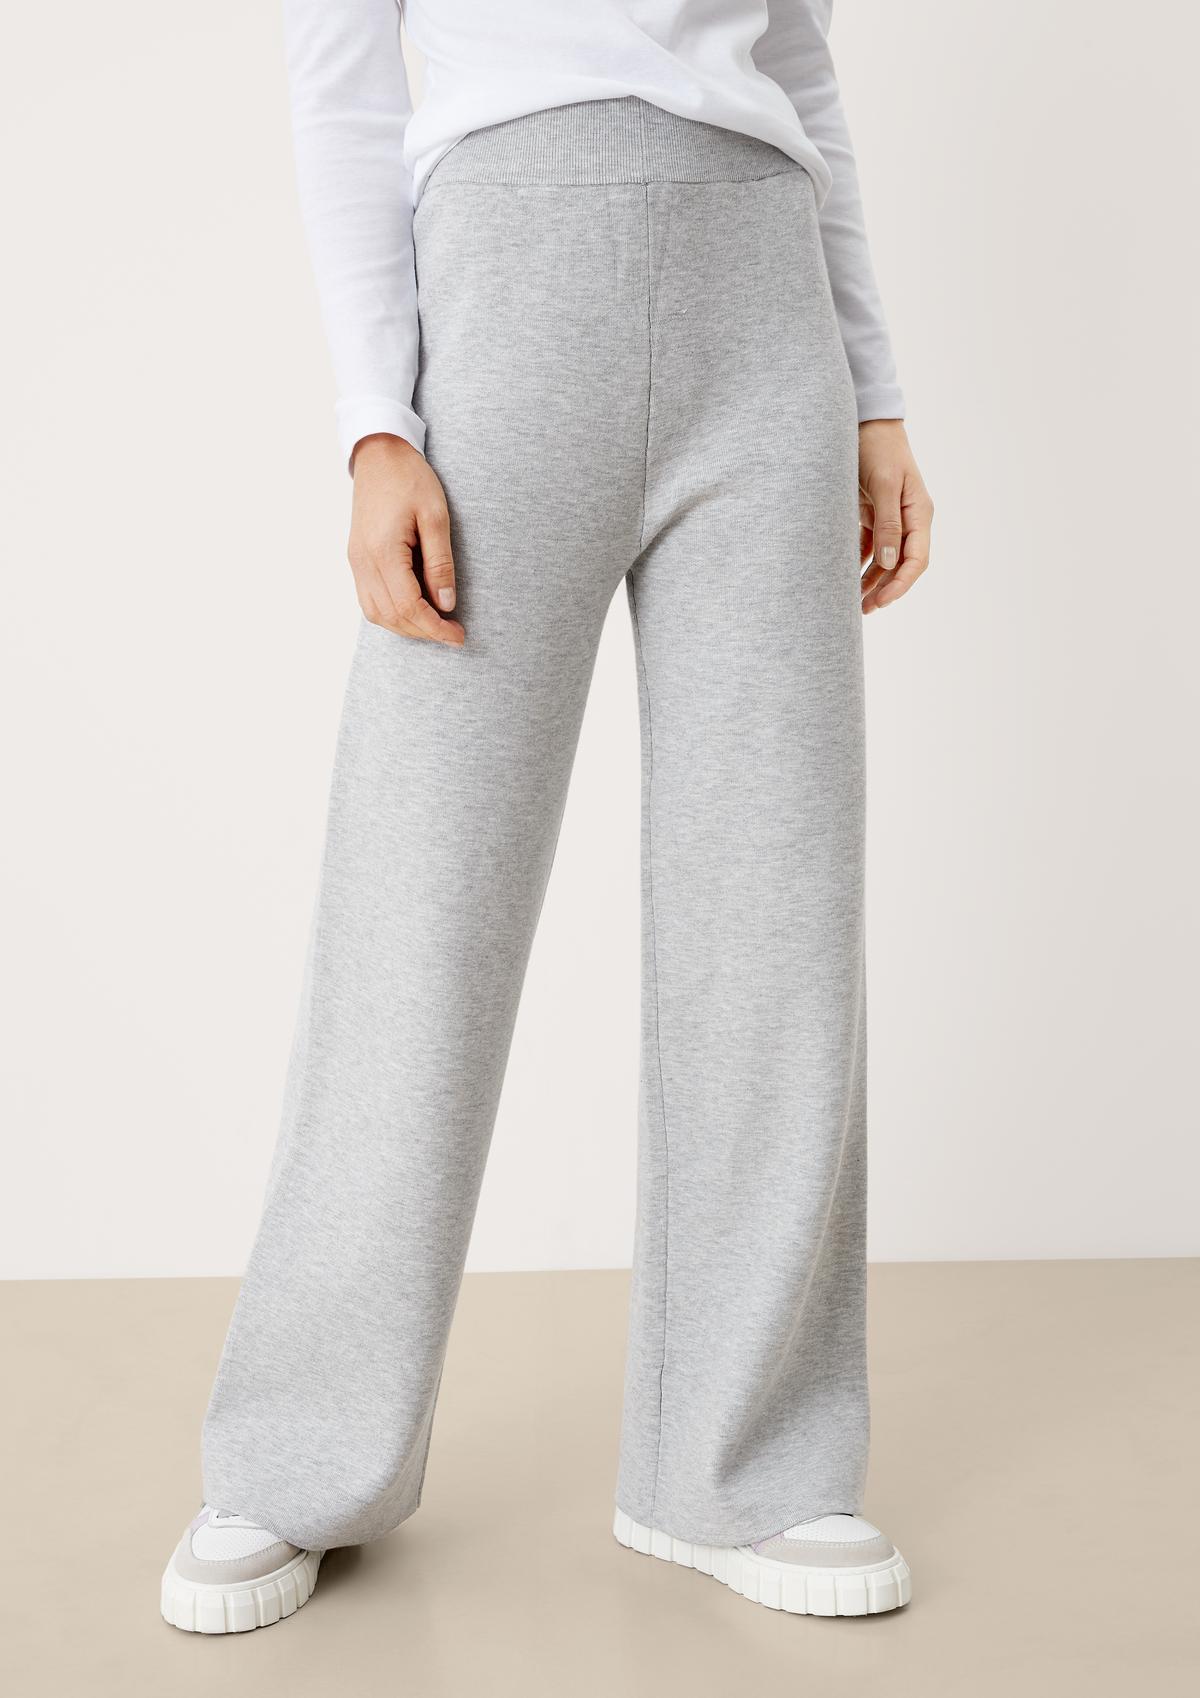 s.Oliver Regular: knit trousers with a wide leg